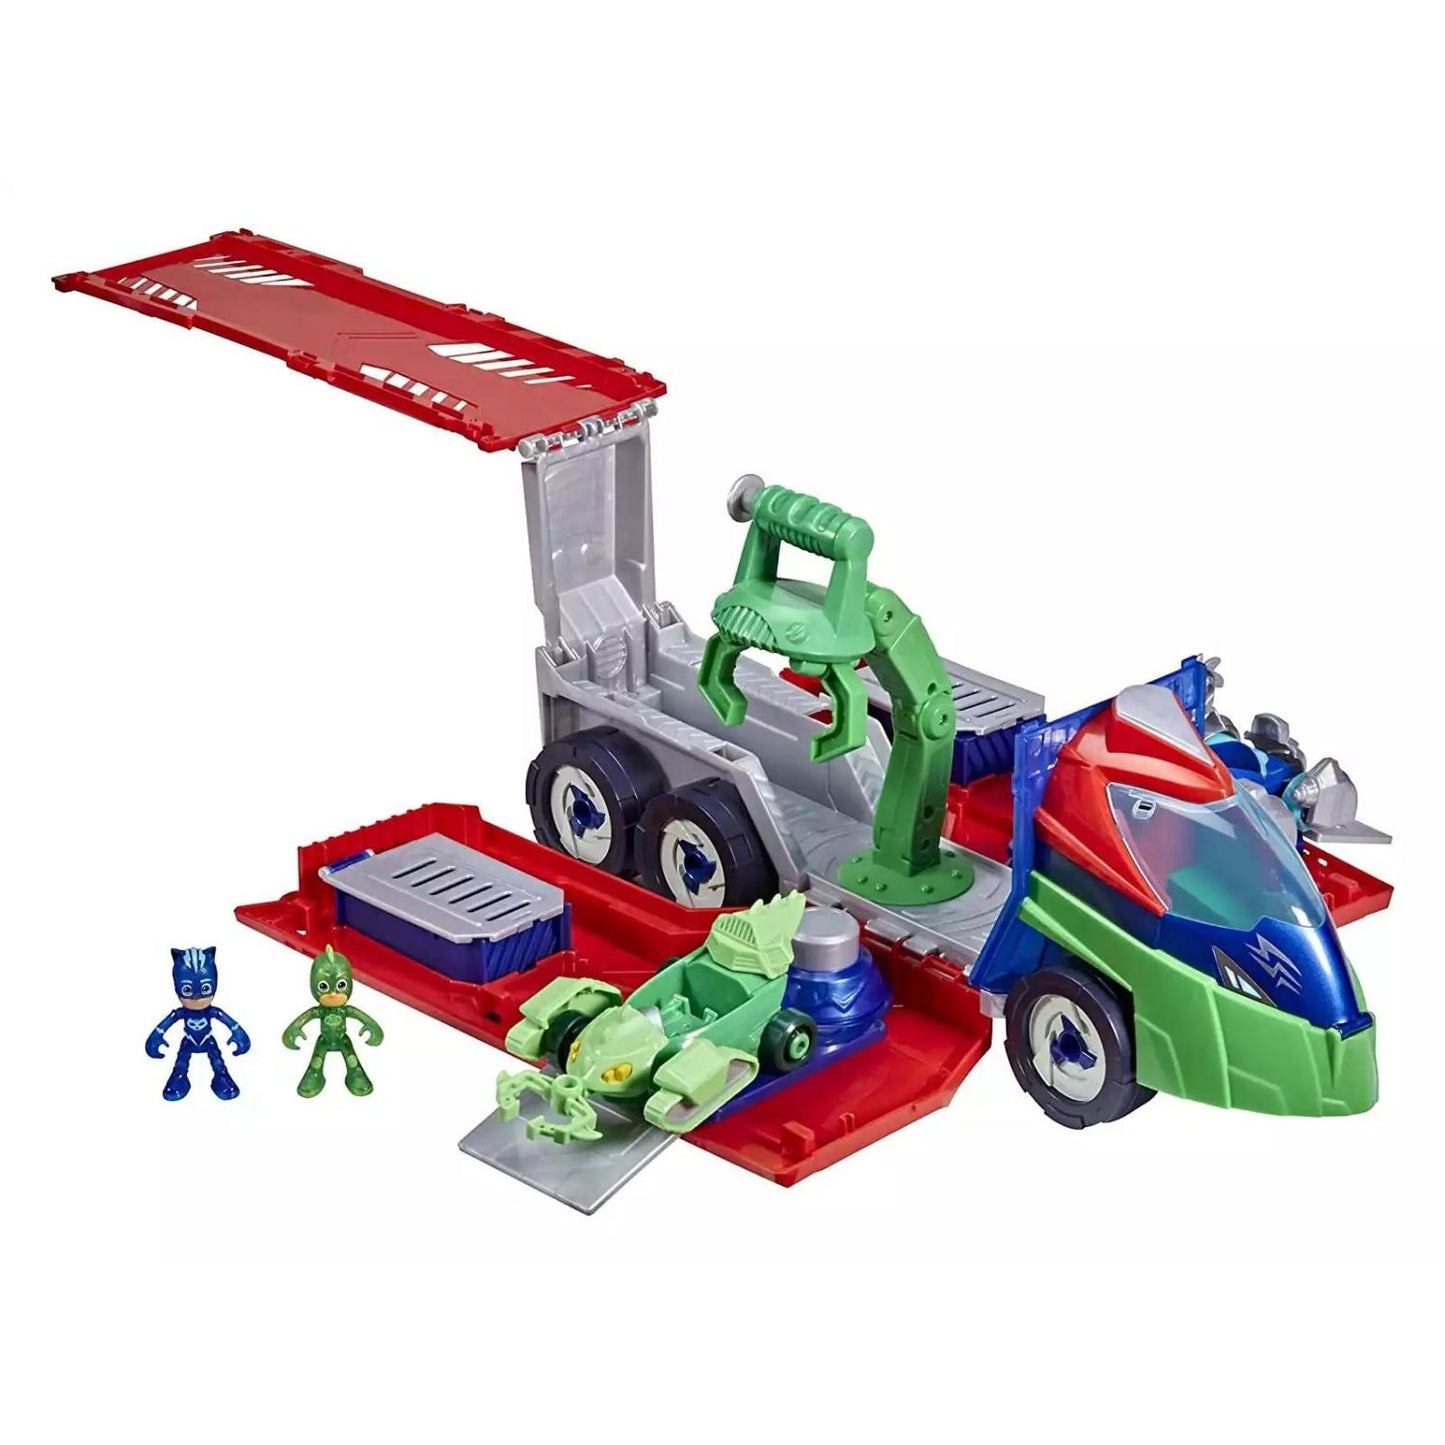 Hasbro - PJ Masks Tracker Truck with F2121 figures and vehicles